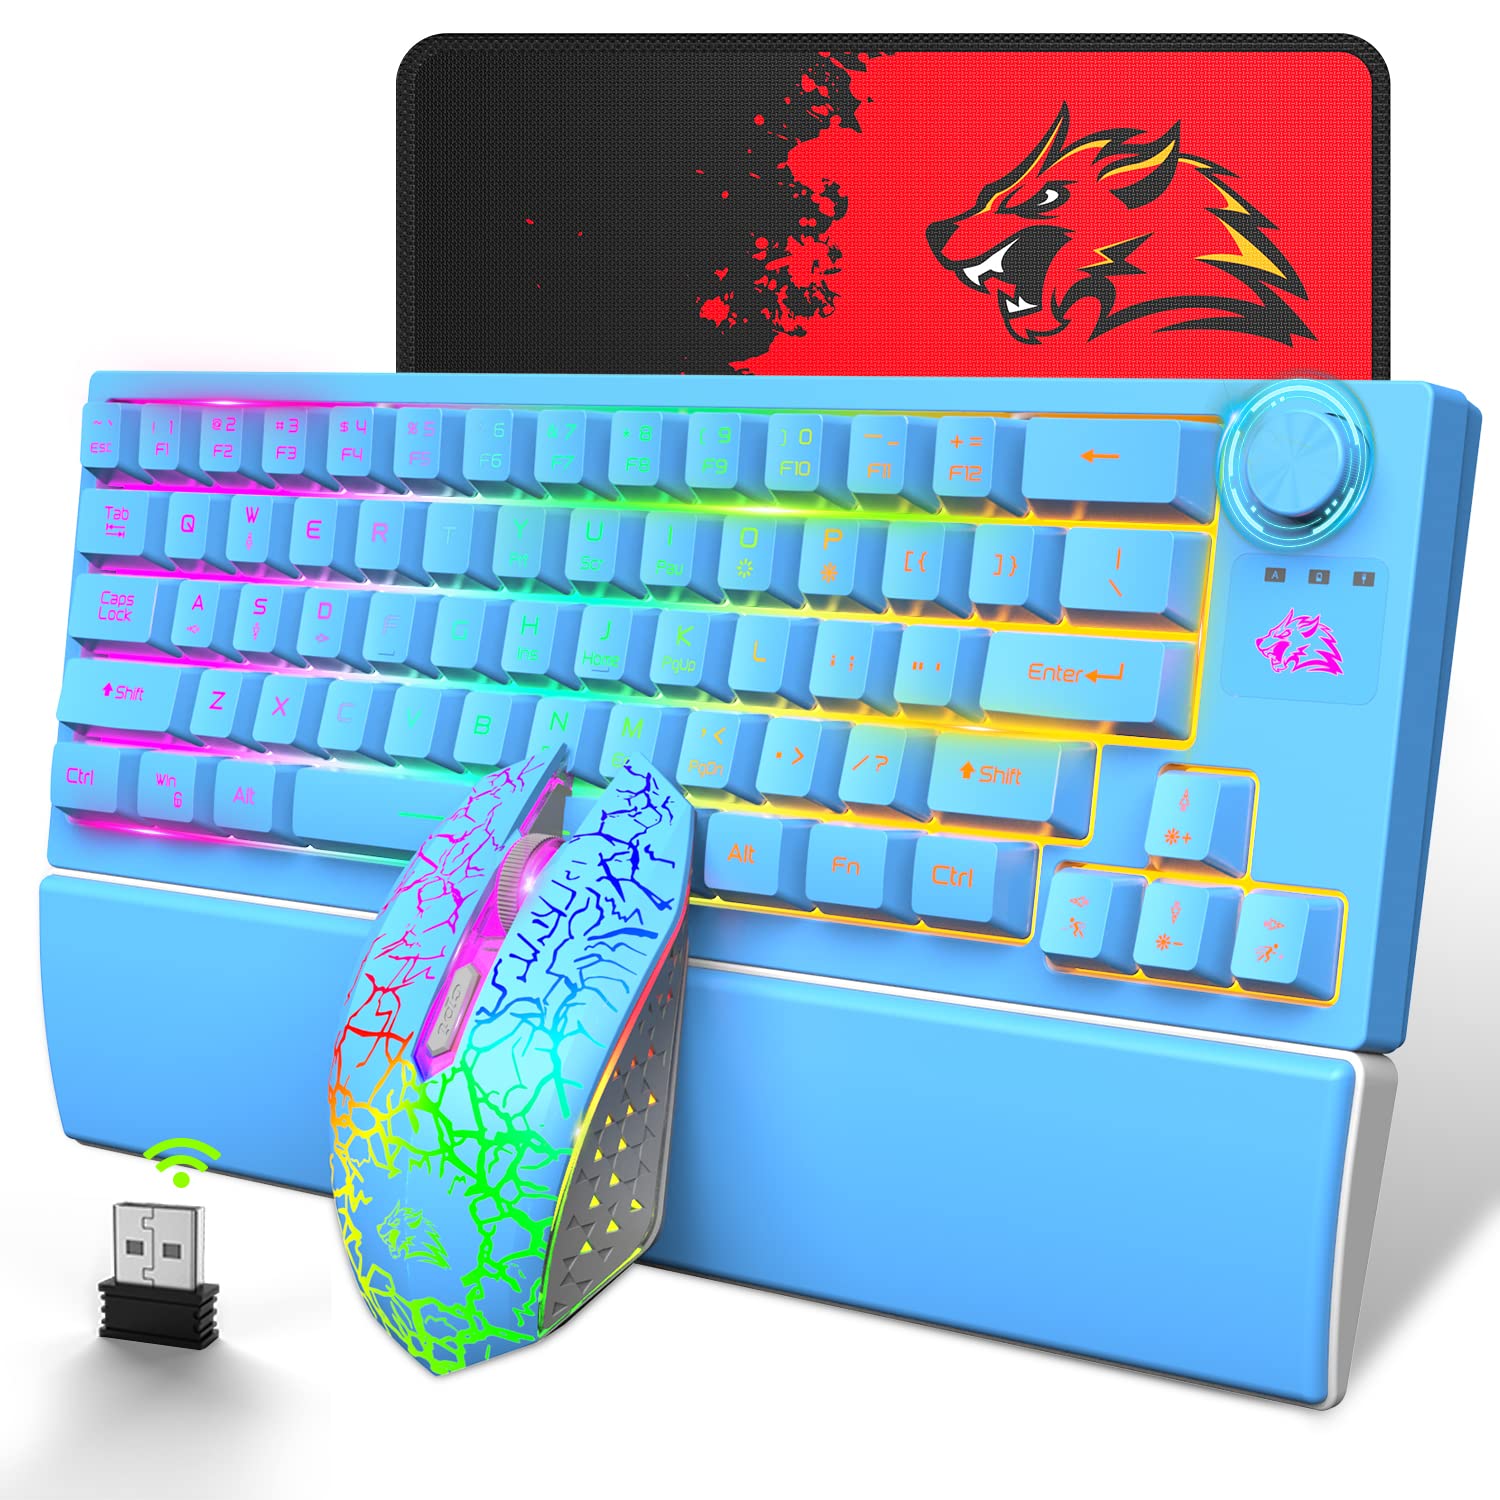 Wireless Gaming Keyboard Mouse and Wrist Rest Combo 12 RGB